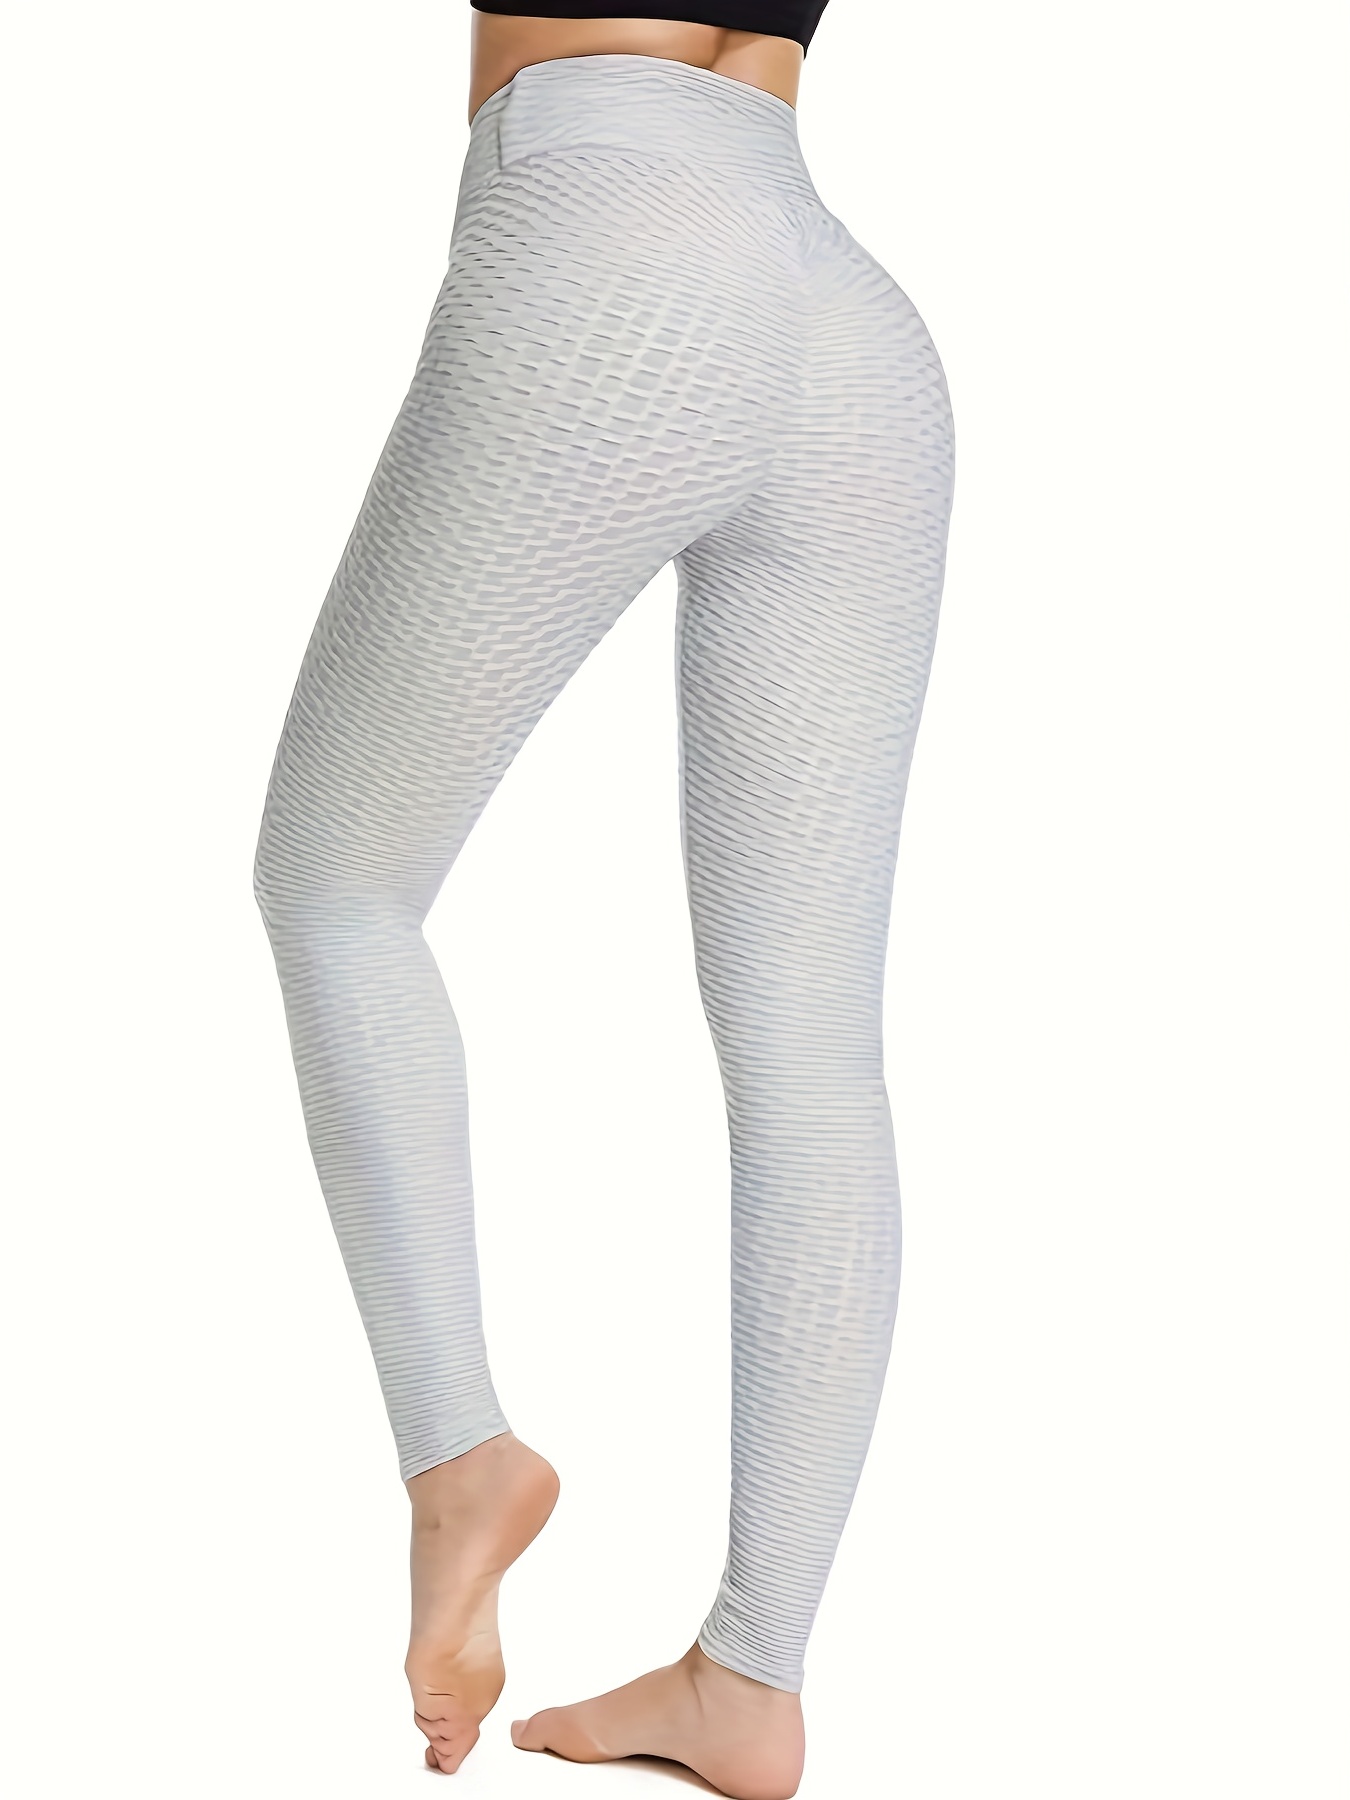 Premium AI Image  Vibrant Front View of White Carbon Fiber Yoga Pants with  Colorful Electrical Accents No Background